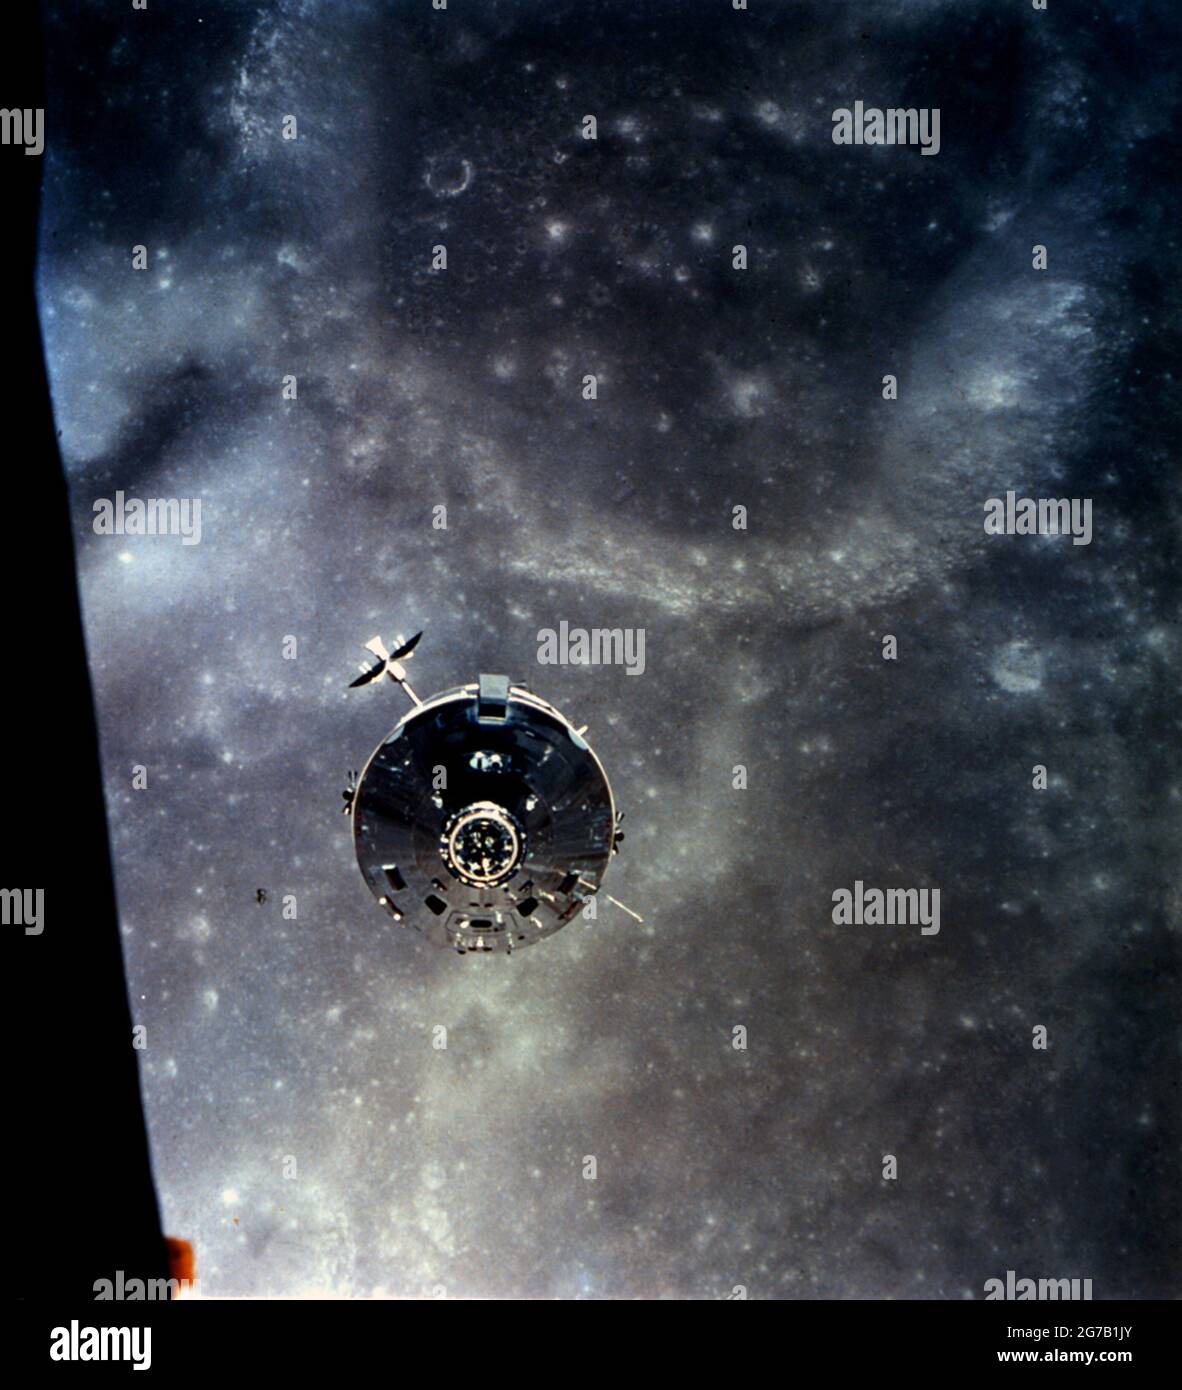 Apollo 16 Command and Service Module Over the Moon. In this image, the Apollo 16 Command and Service Module (CSM) 'Casper' approaches the Lunar Module (LM). The two spacecraft were about to make their final rendezvous of the mission, on 23 April 1972. Astronauts John W. Young and Charles M. Duke Jr., aboard the LM, were returning to the CSM in lunar orbit after three successful days on the lunar surface. Astronaut Thomas K. Mattingly II was in the CSM.  A unique optimised and enhanced version of an NASA image / credit NASA Stock Photo